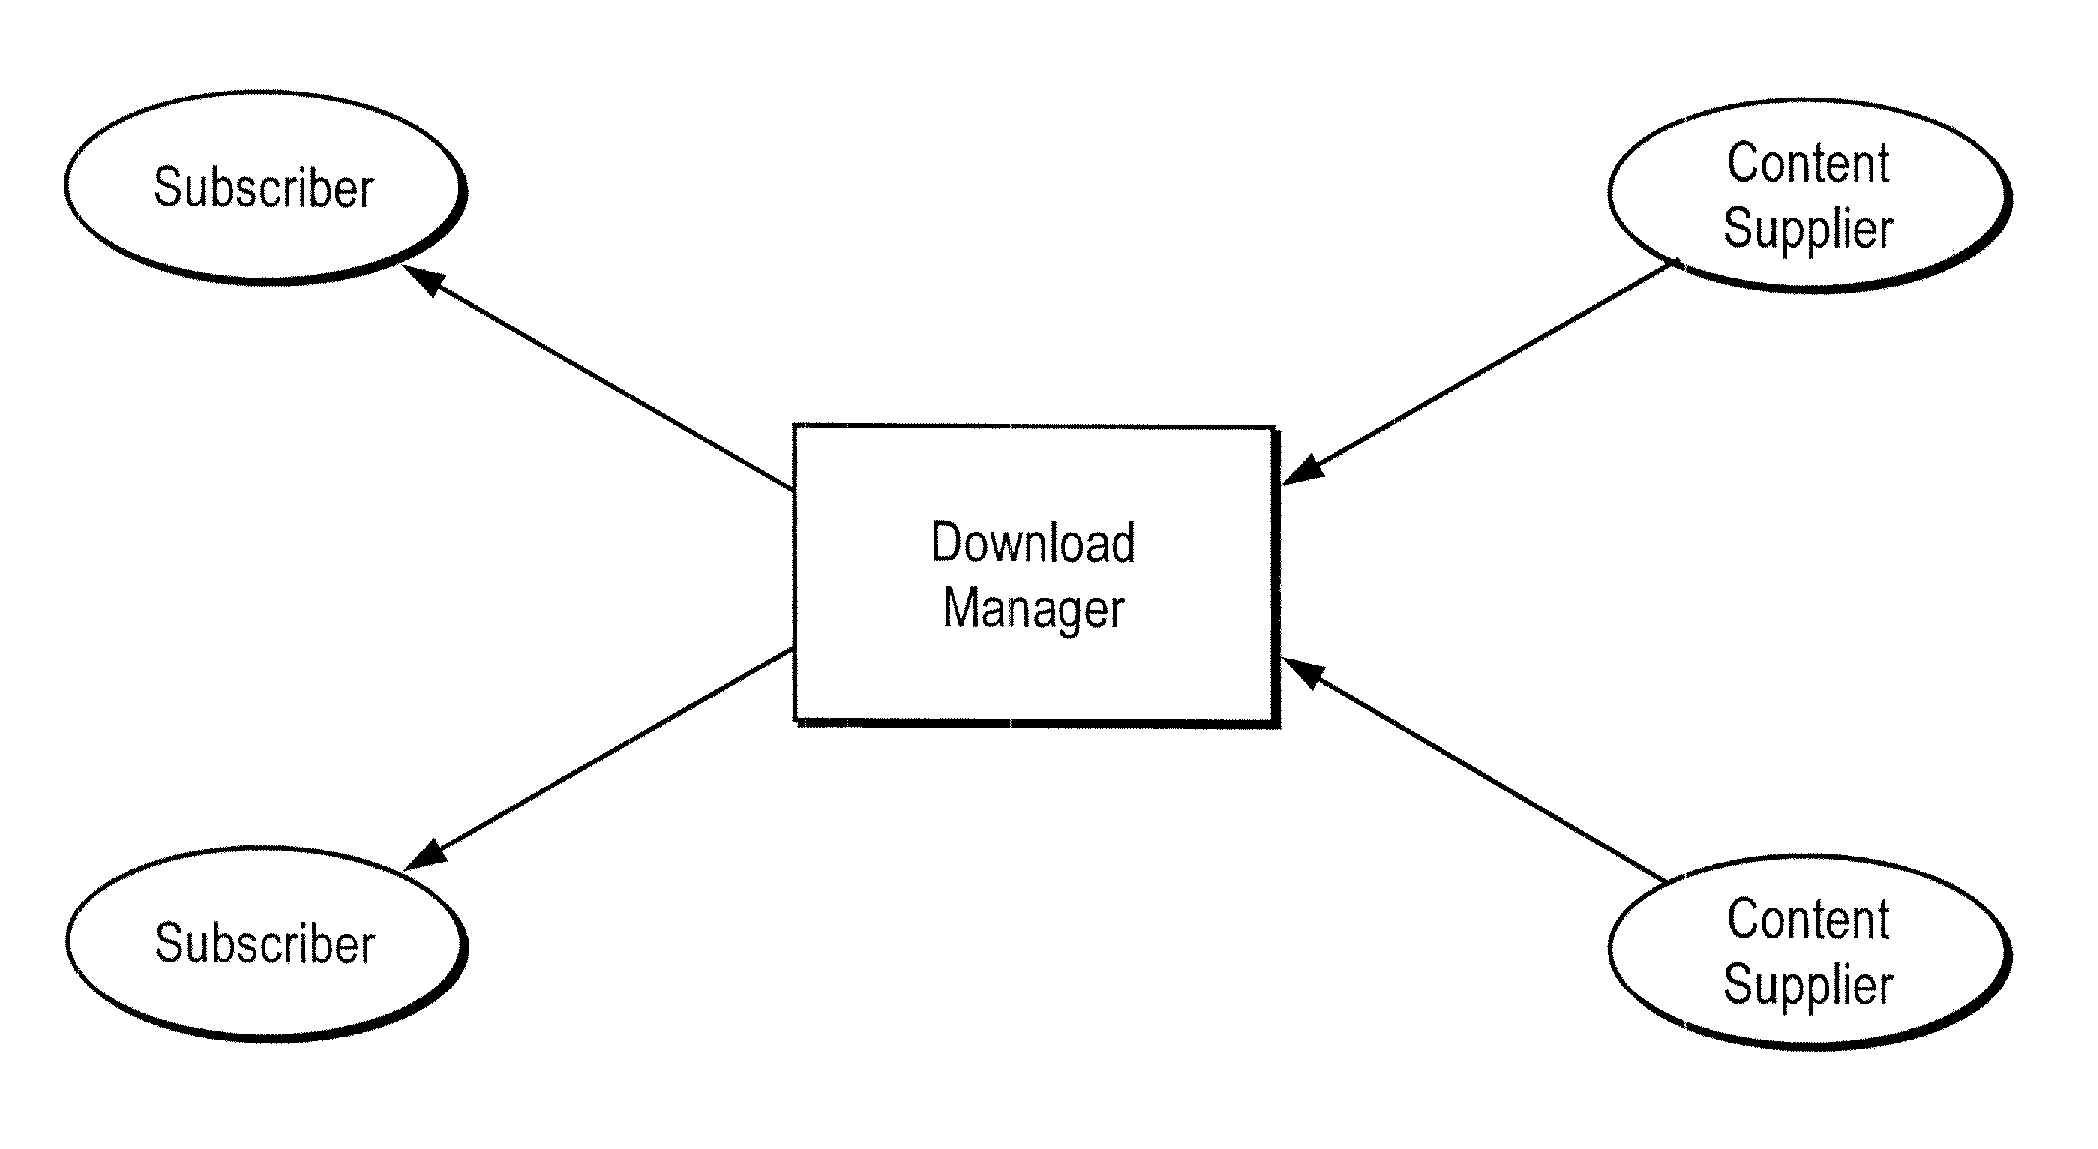 Domain-based management of distribution of digital content from multiple suppliers to multiple wireless services subscribers